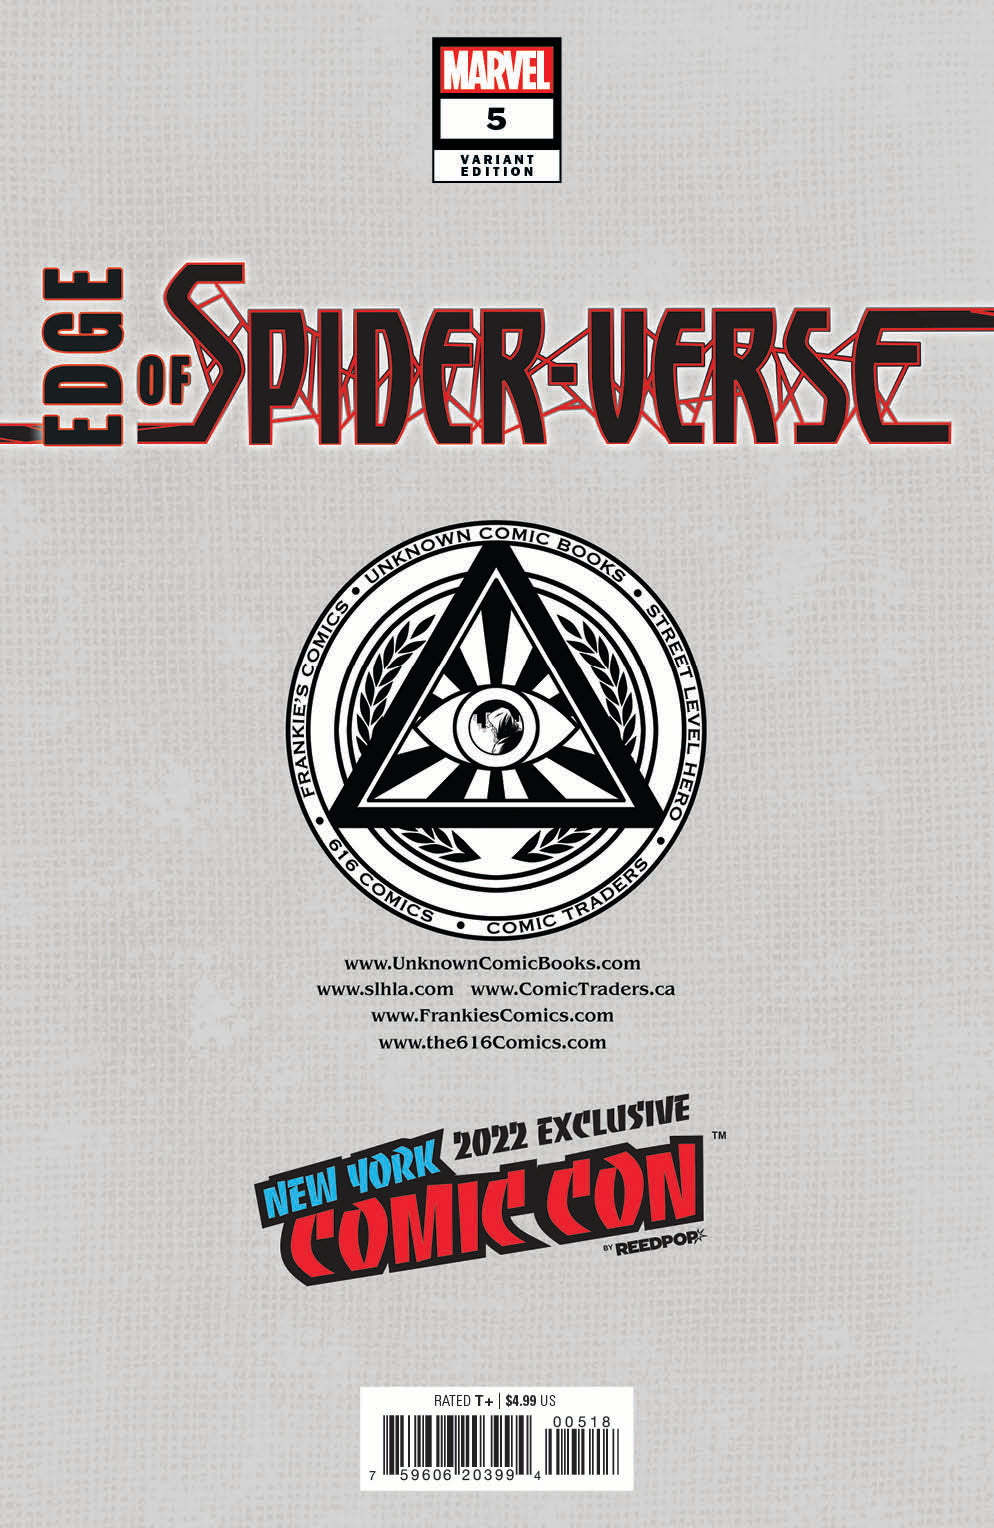 EDGE OF SPIDER-VERSE #5 UNKNOWN COMICS TYLER KIRKHAM EXCLUSIVE NYCC 2022 SILVER VAR (11/02/2022)